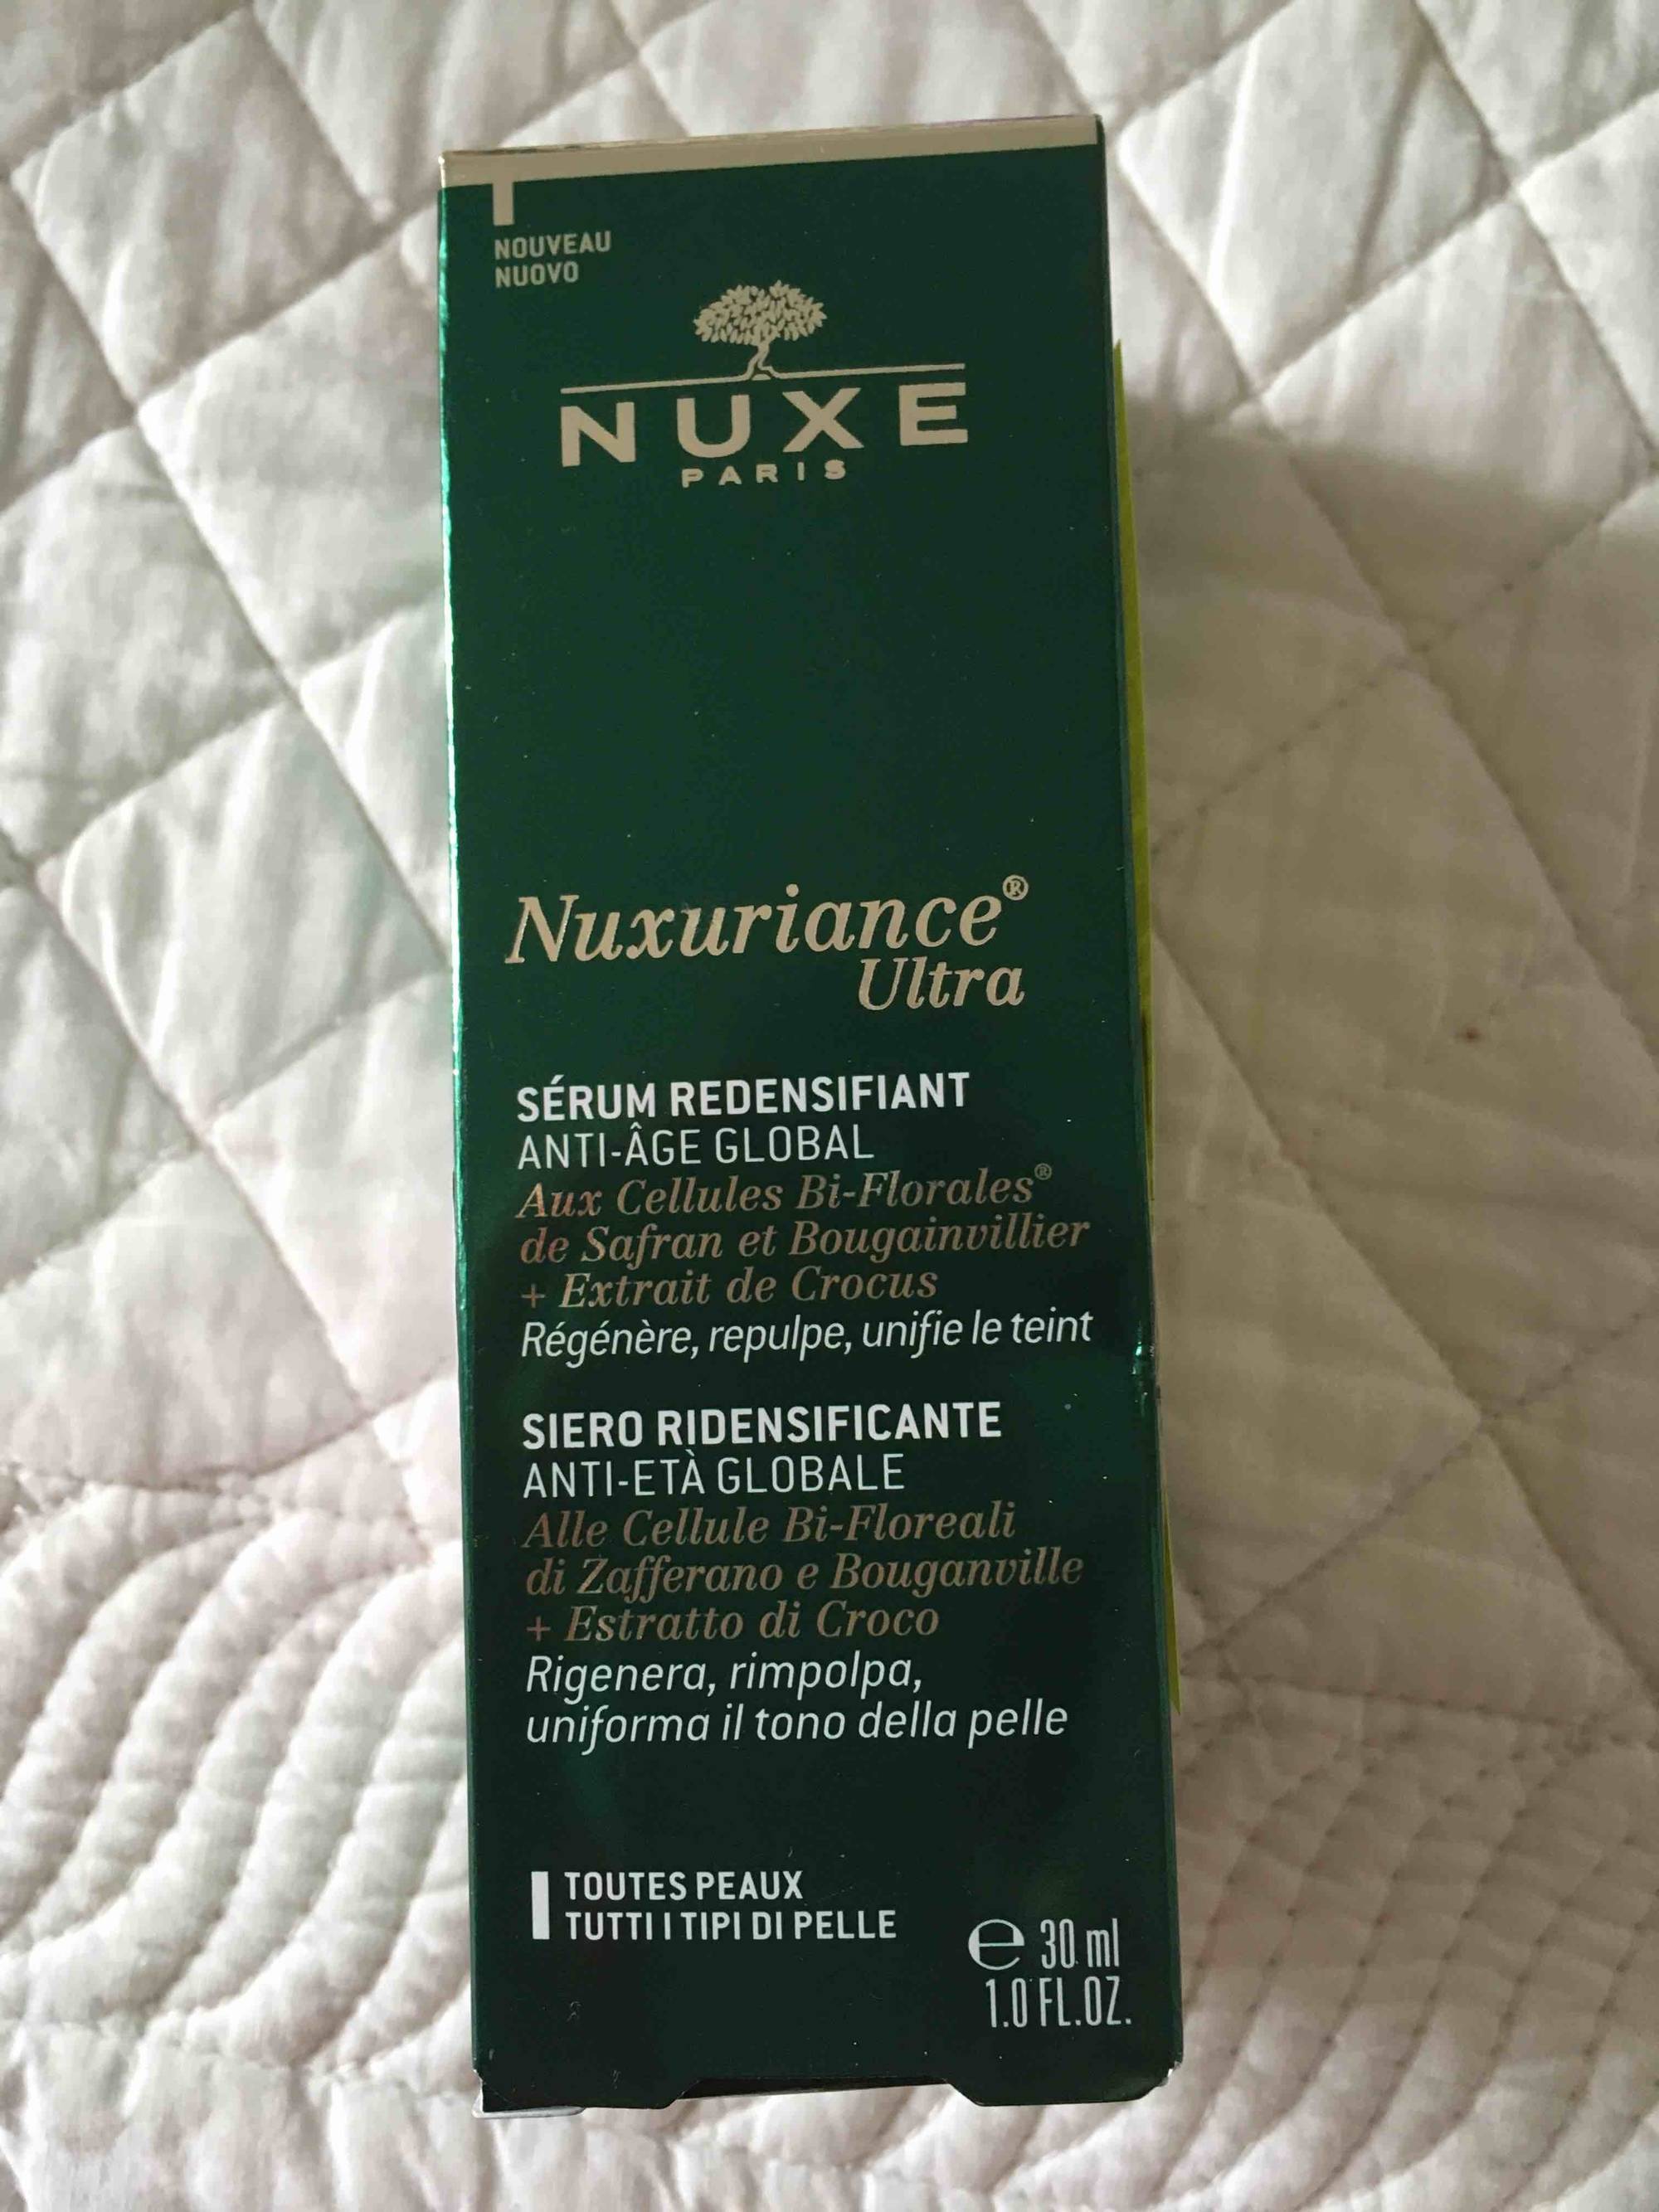 NUXE - Nuxuriance ultra - Sérum redensifiant anti-âge global